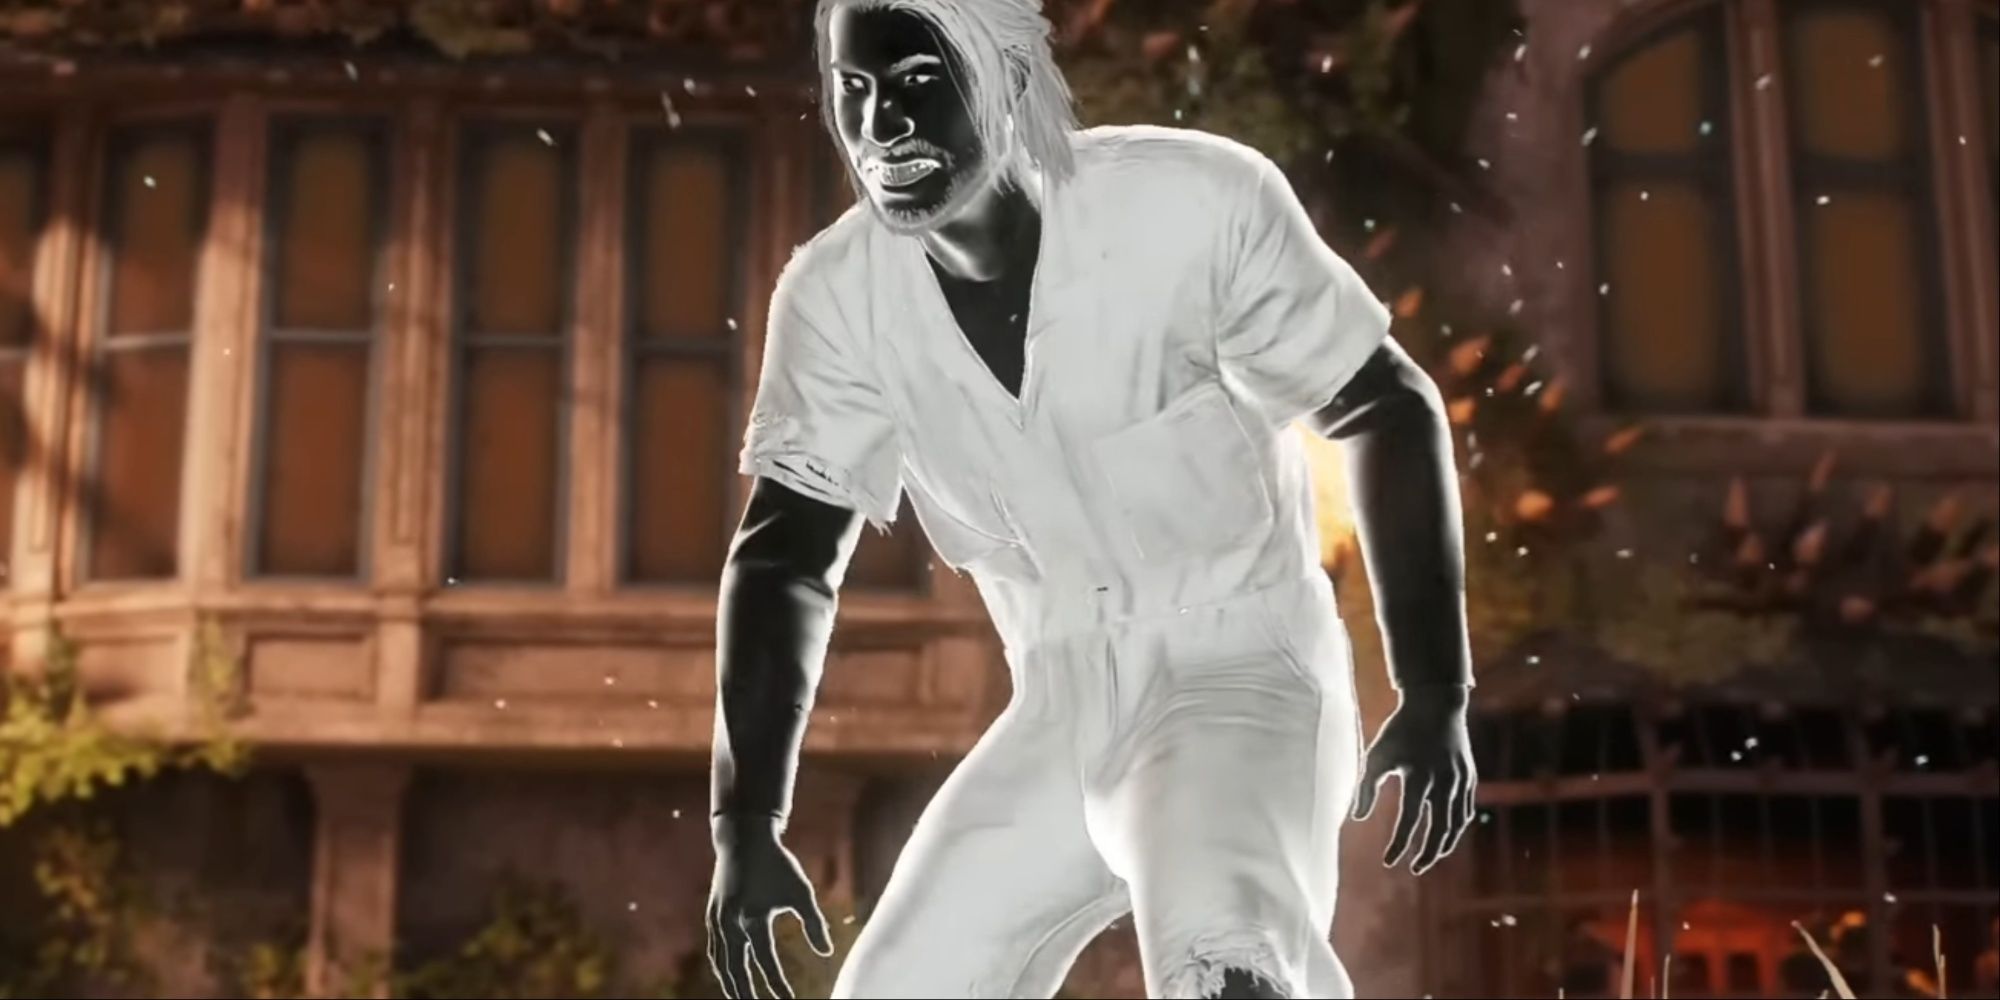 Martin Li as Mister Negative in his Raft jumpsuit while facing off with Miles in Kraven's arena.